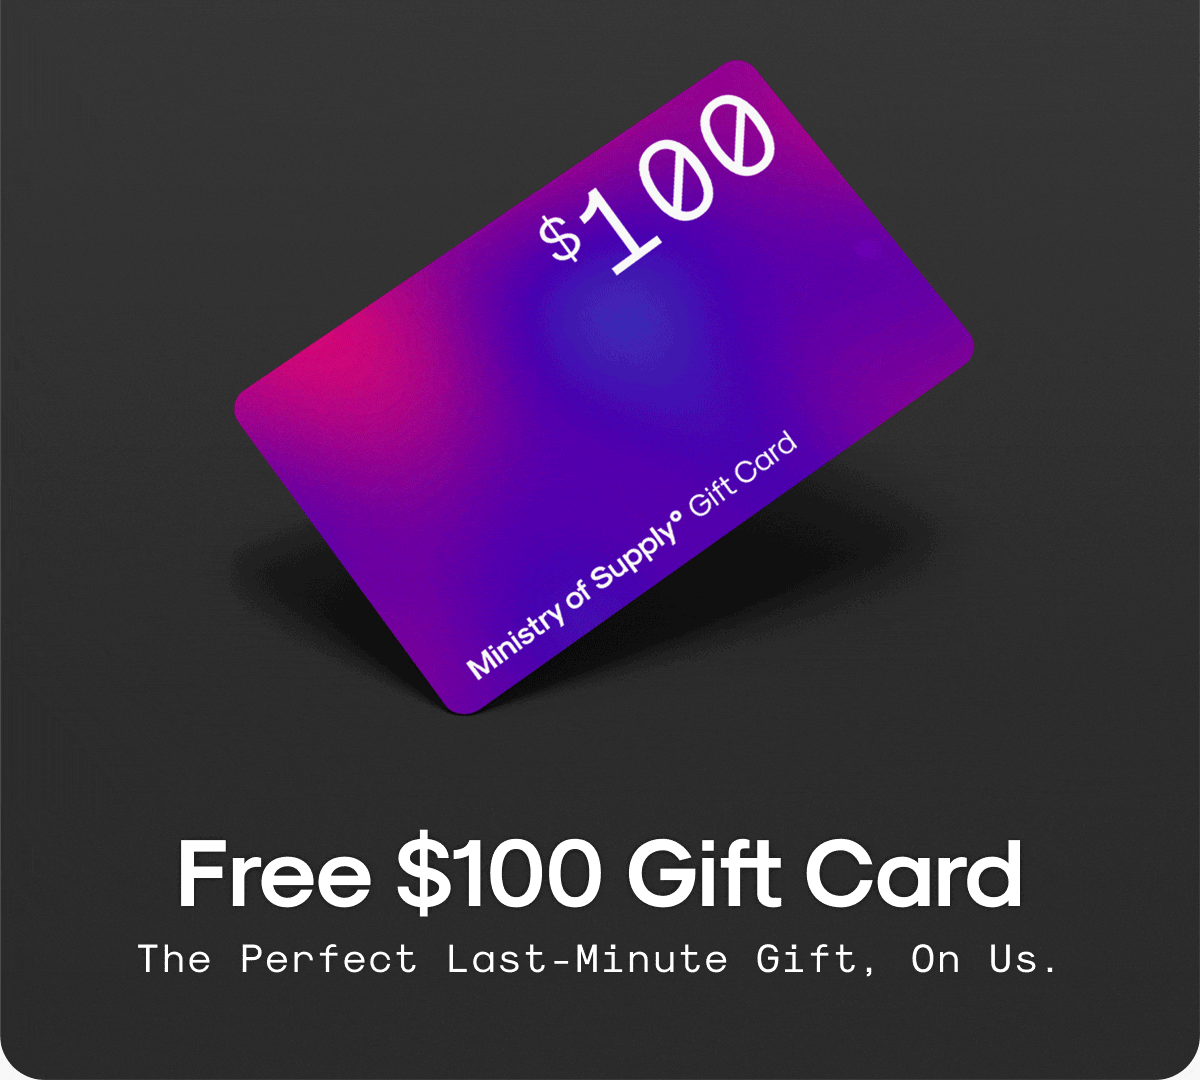 Free \\$100 Gift Card: The Perfect Last-Minute Gift, On Us.